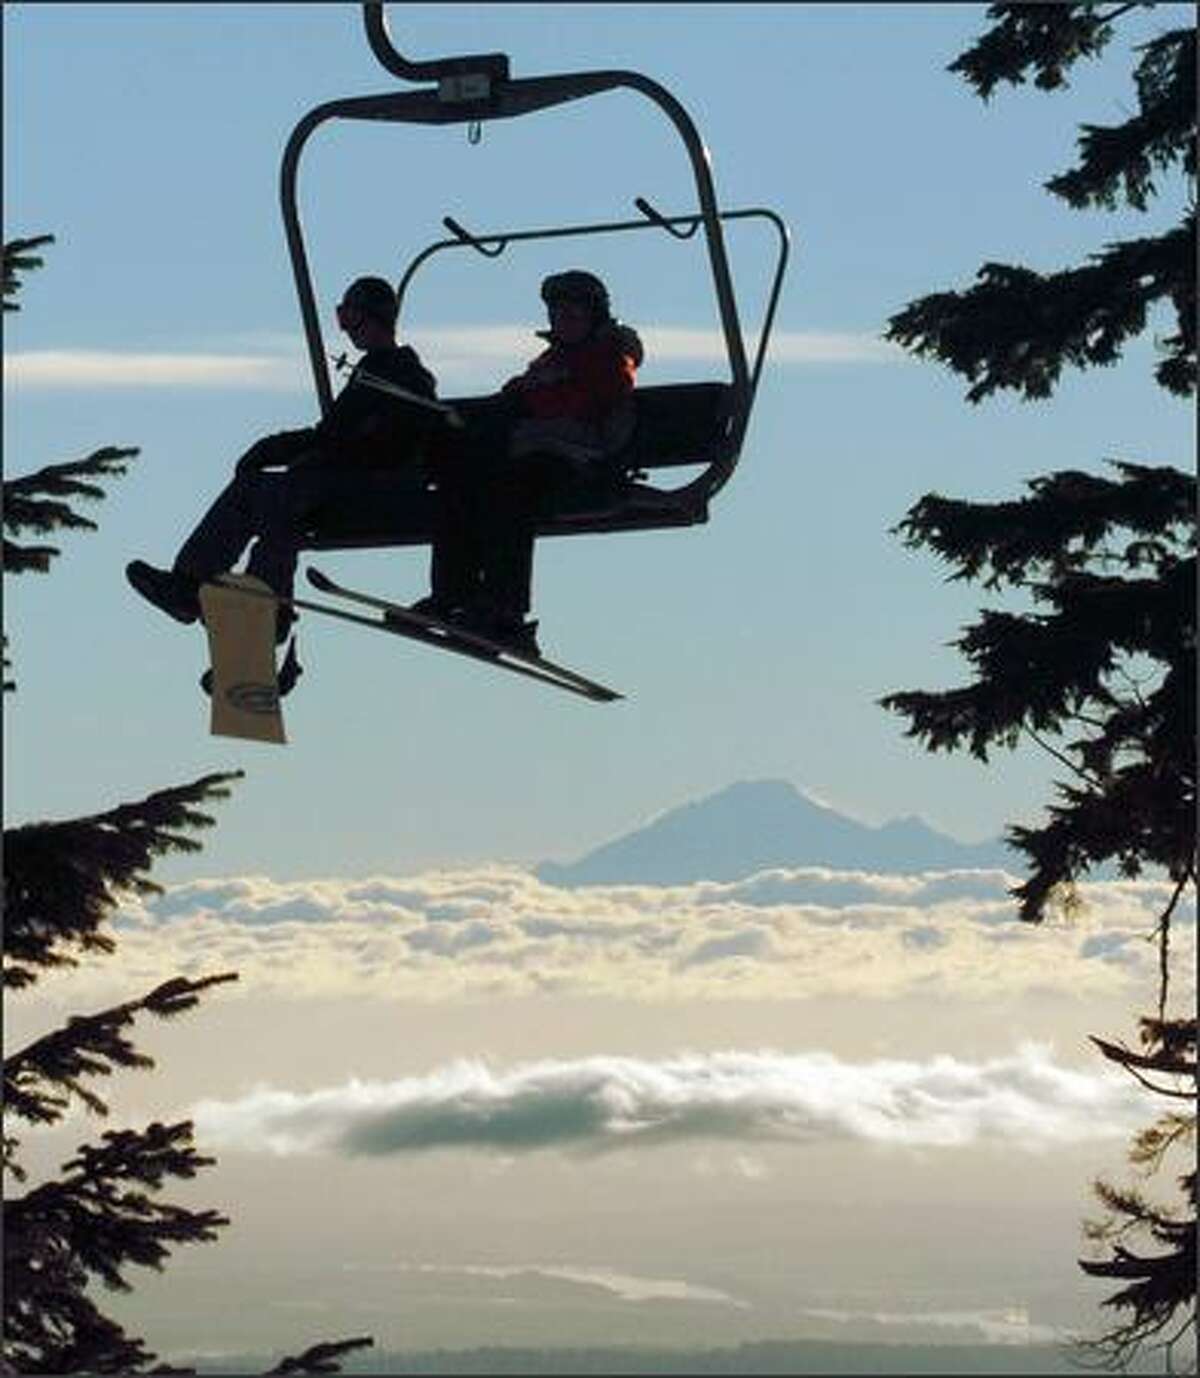 Early morning skiers at Grouse Mountain get a spectacular view of Mount Baker in Washington.